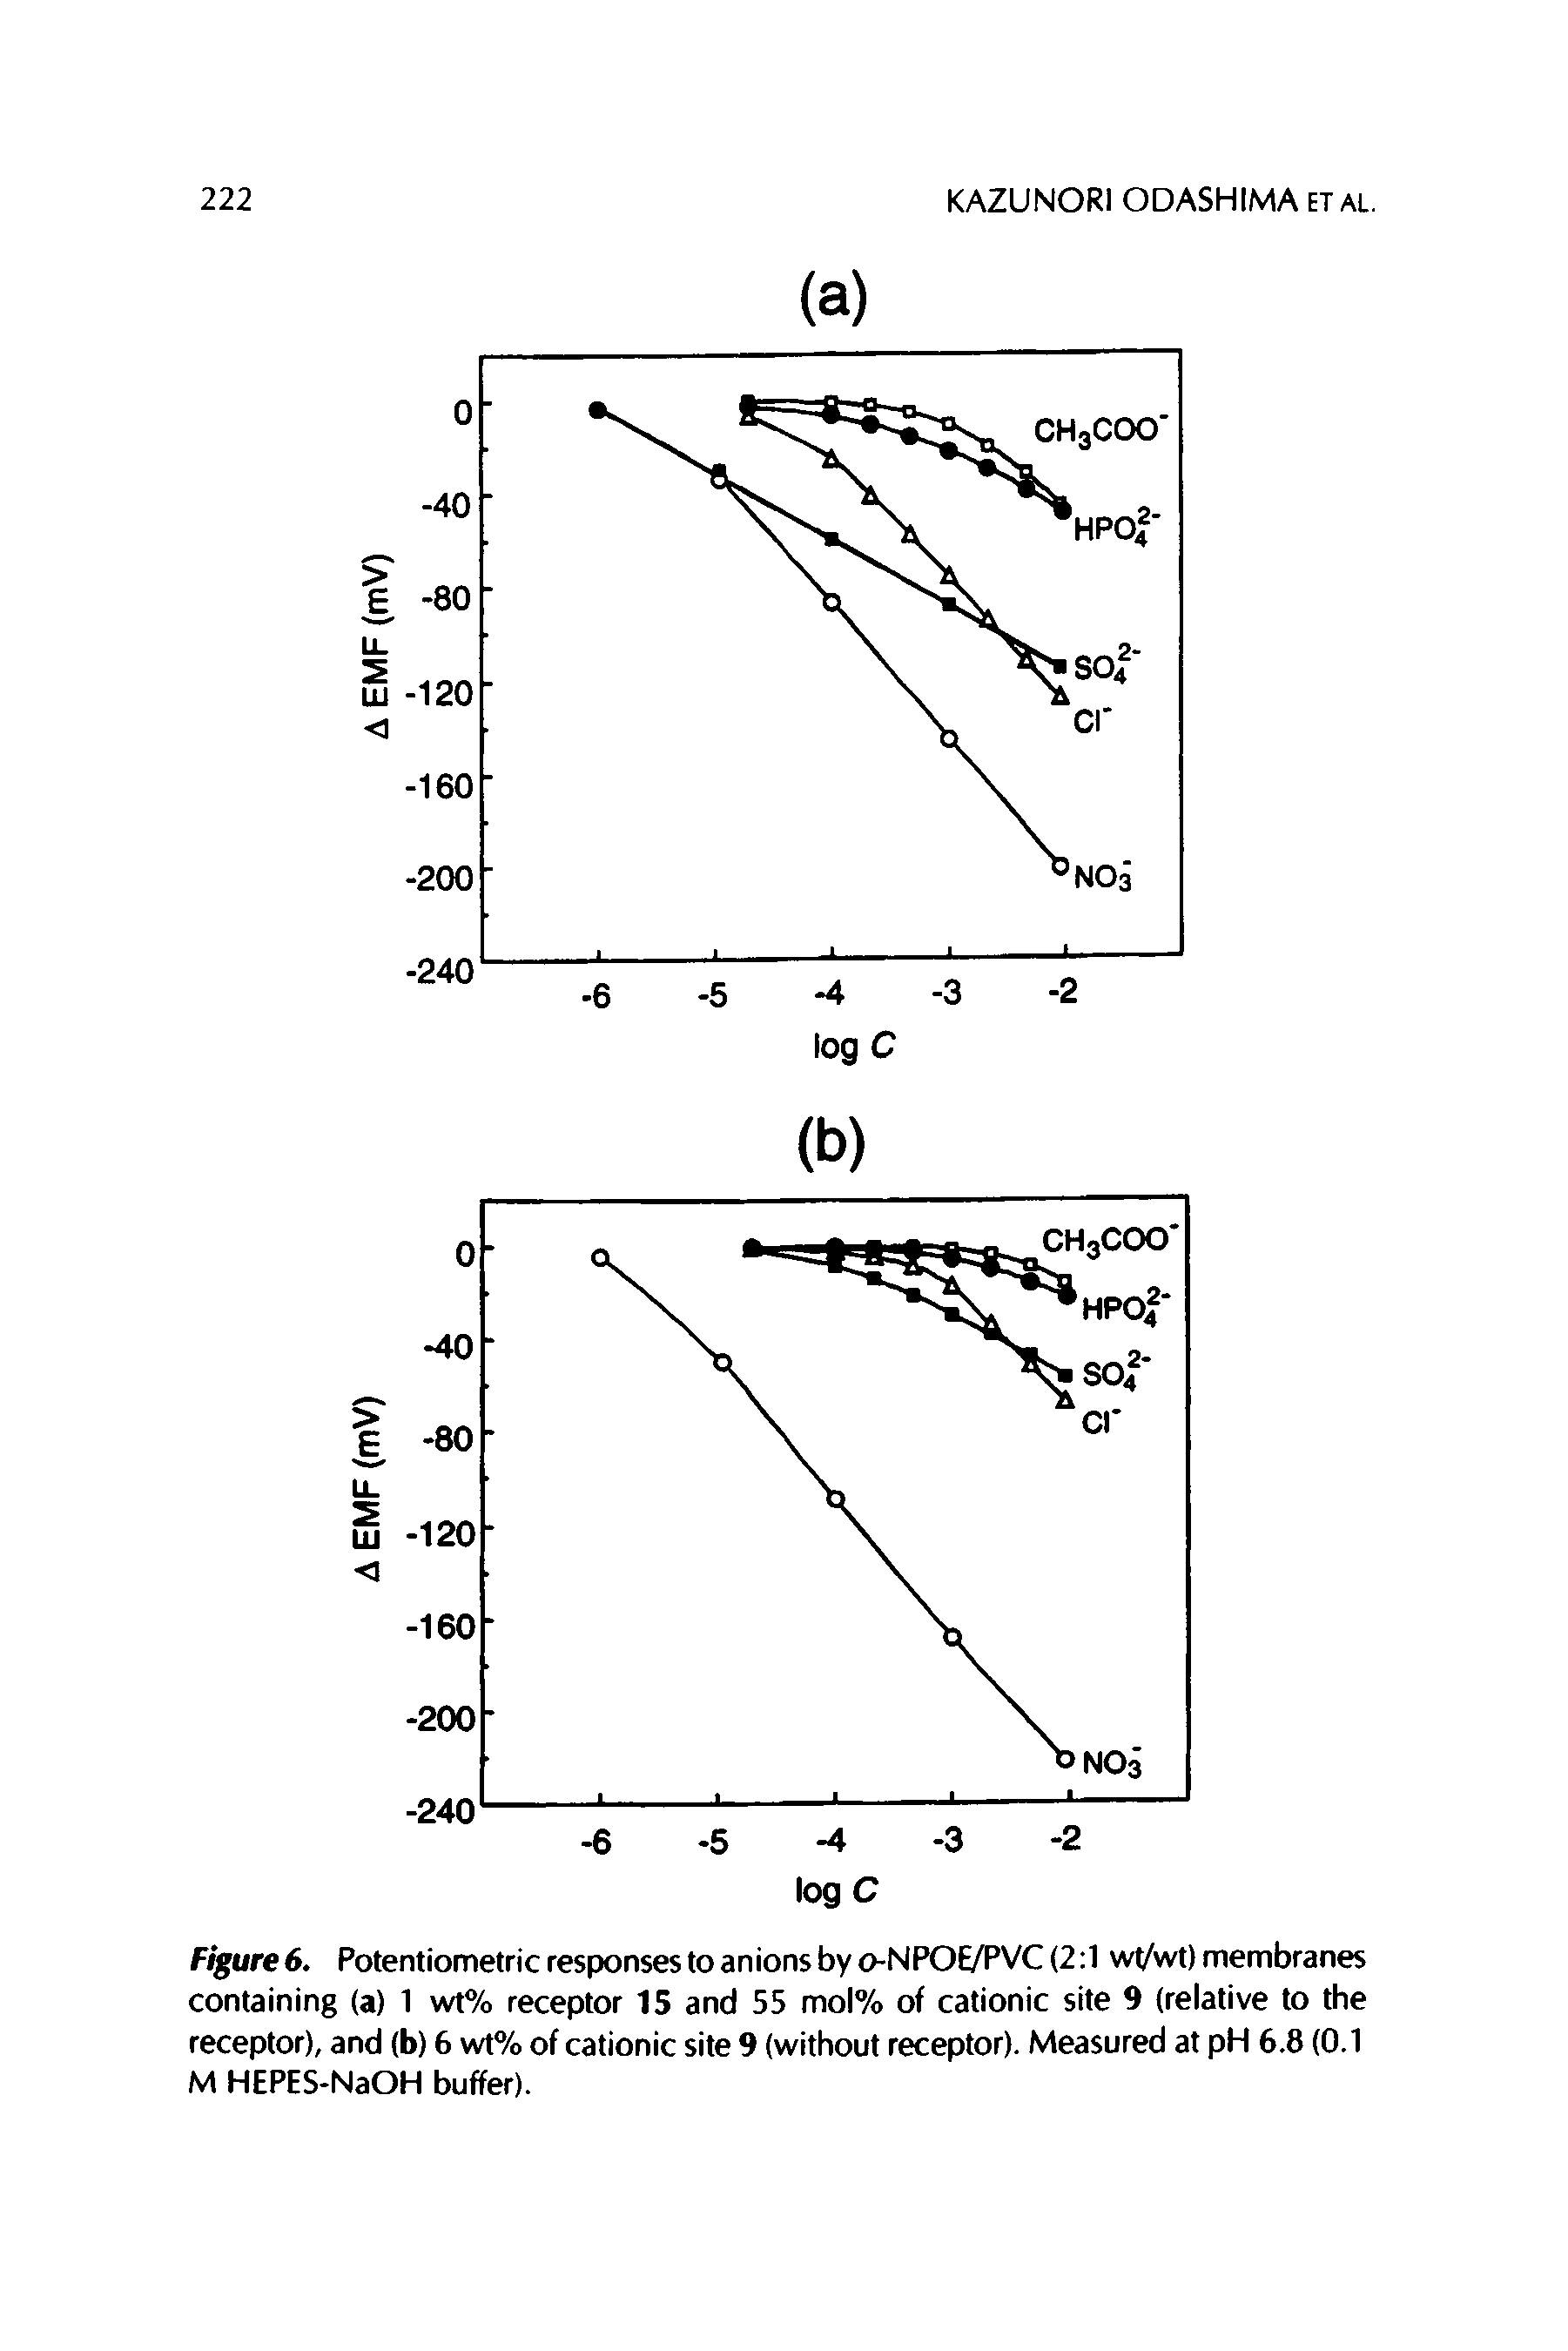 Figure 6. Potentiometric responses to anions by o-NPOE/PVC (2 1 wt/wt) membranes containing (a) 1 wt% receptor 15 and 55 mol% of cationic site 9 (relative to the receptor), and (b) 6 wt% of cationic site 9 (without receptor). Measured at pH 6.8 (0.1 M HEPES-NaOH buffer).